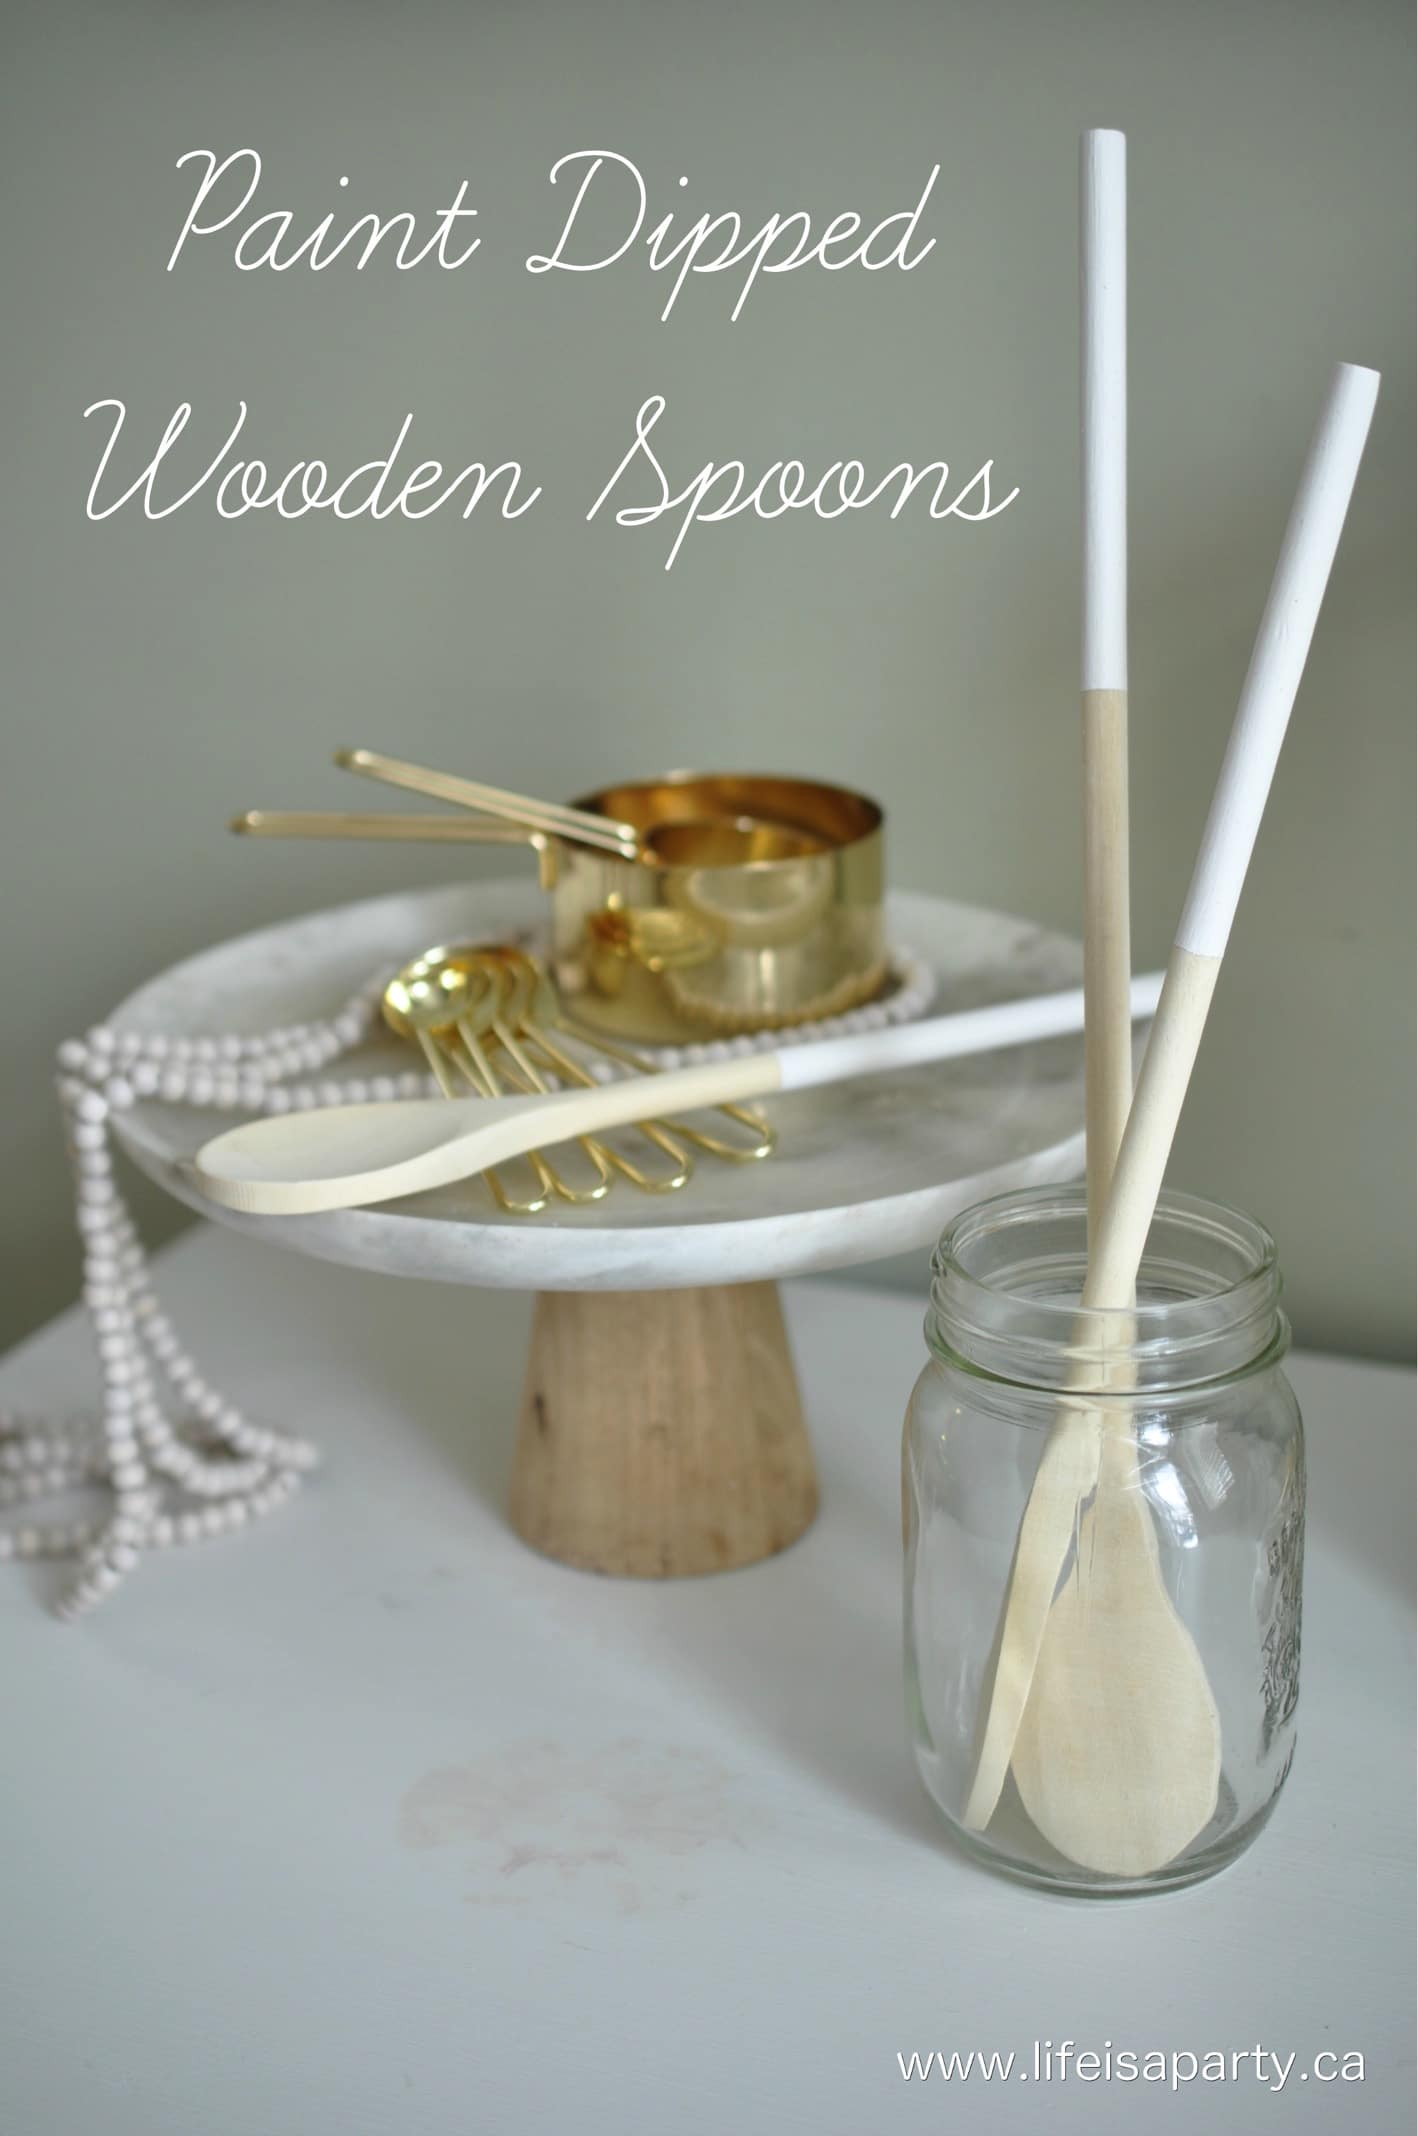 Paint Dipped Wooden Spoons